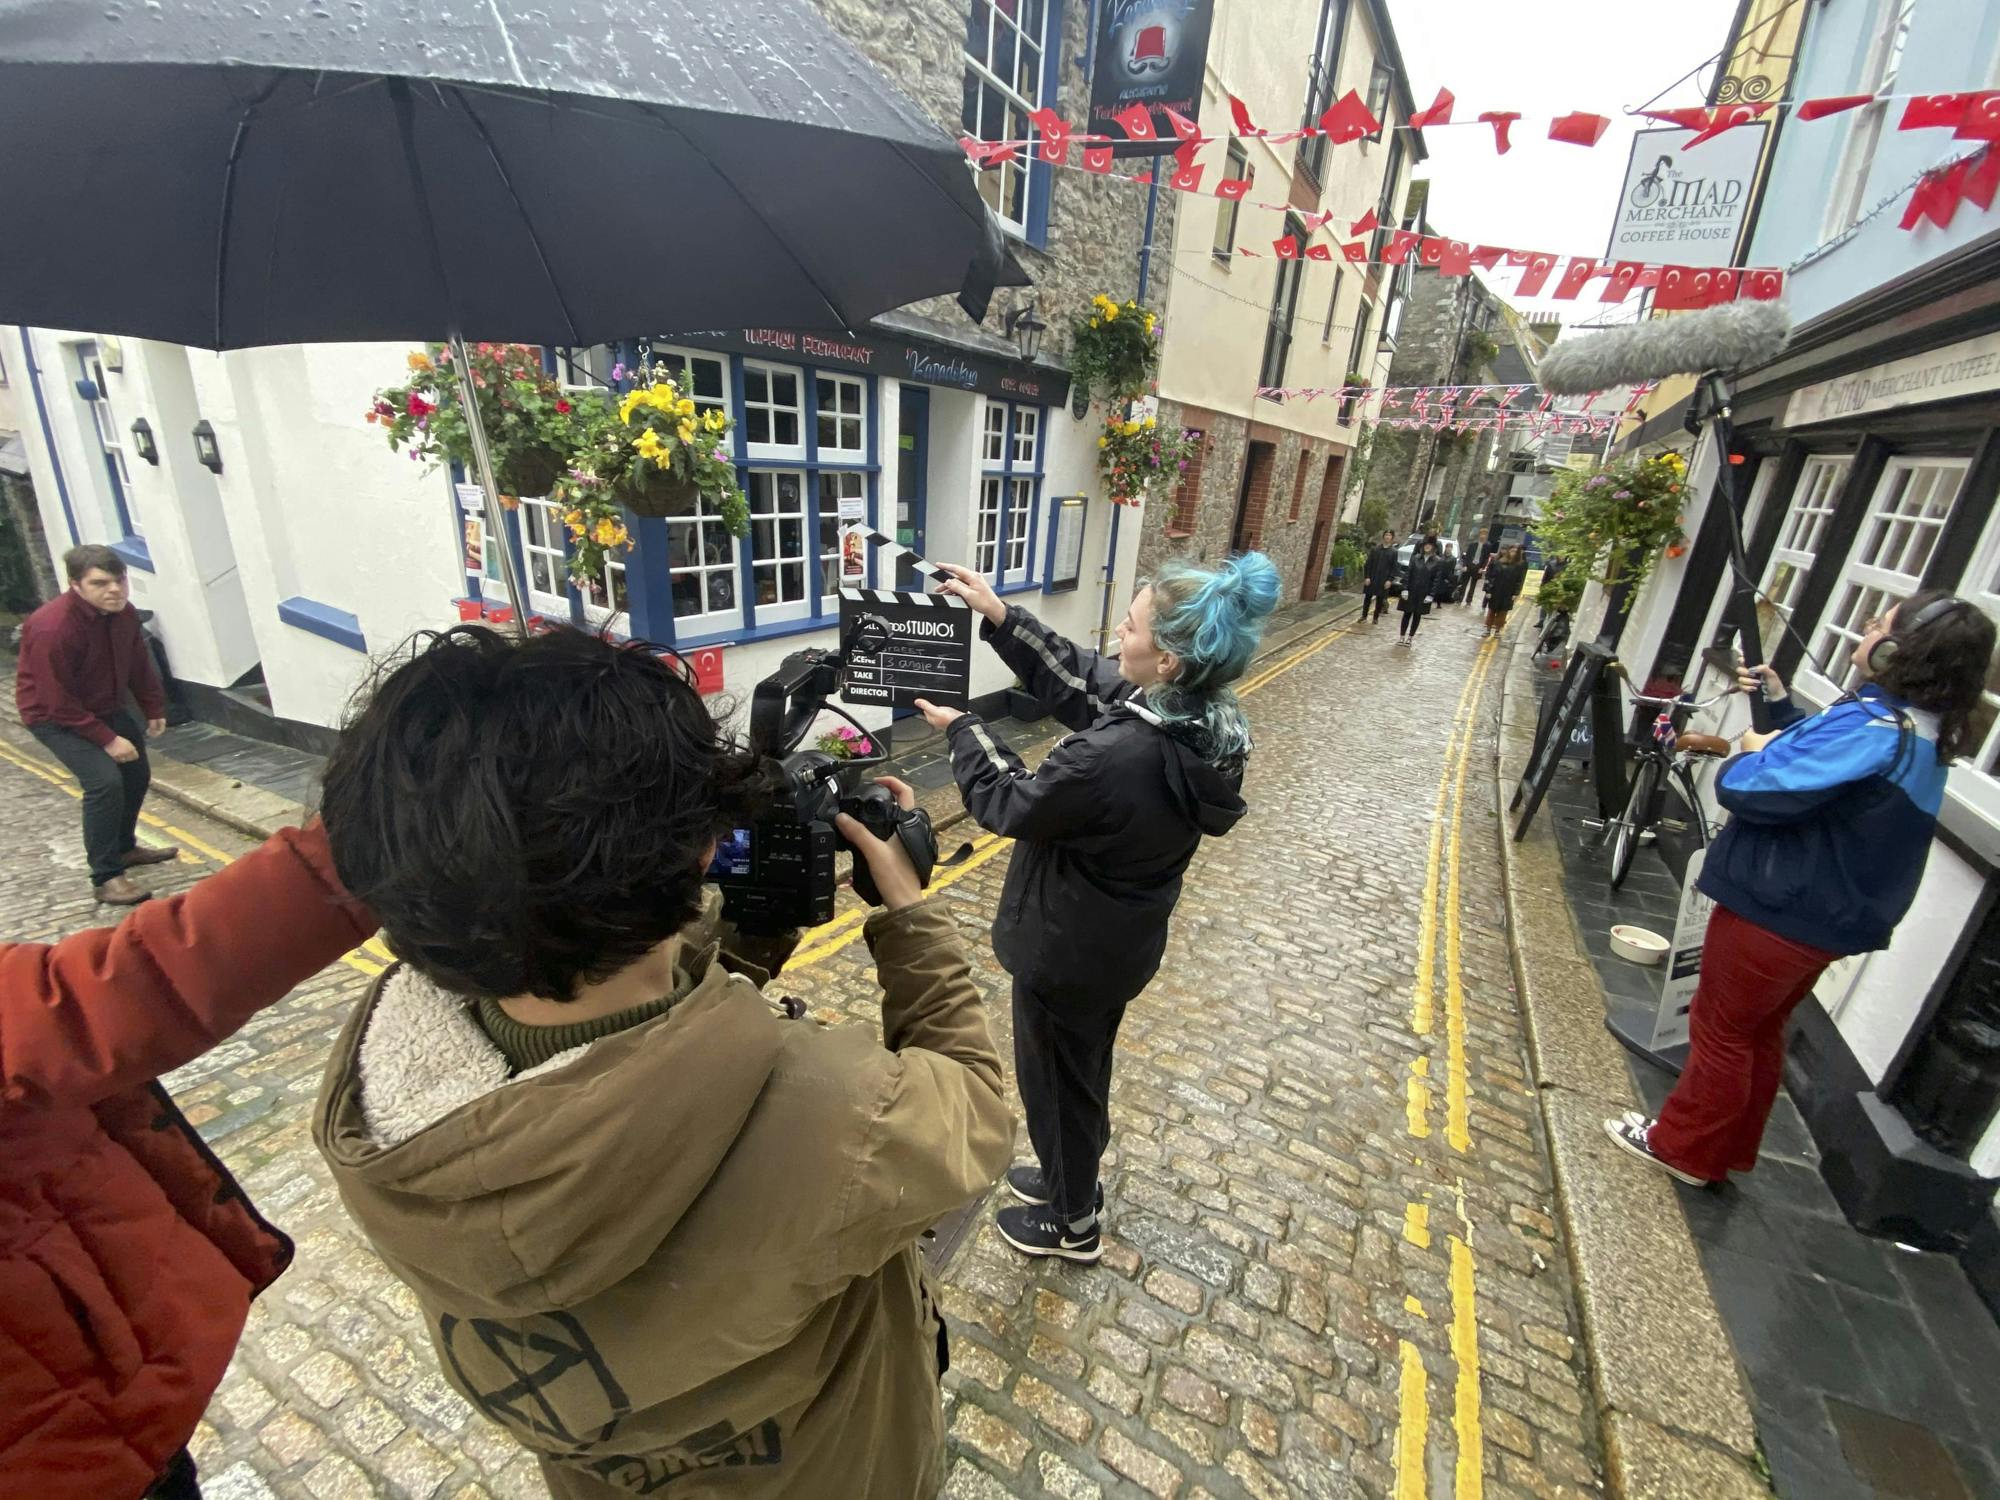 On a cobble stoned street in Plymouth, two students look through the lens of a professional camera aimed at a girl with a black film clapper ready to shoot the scene.